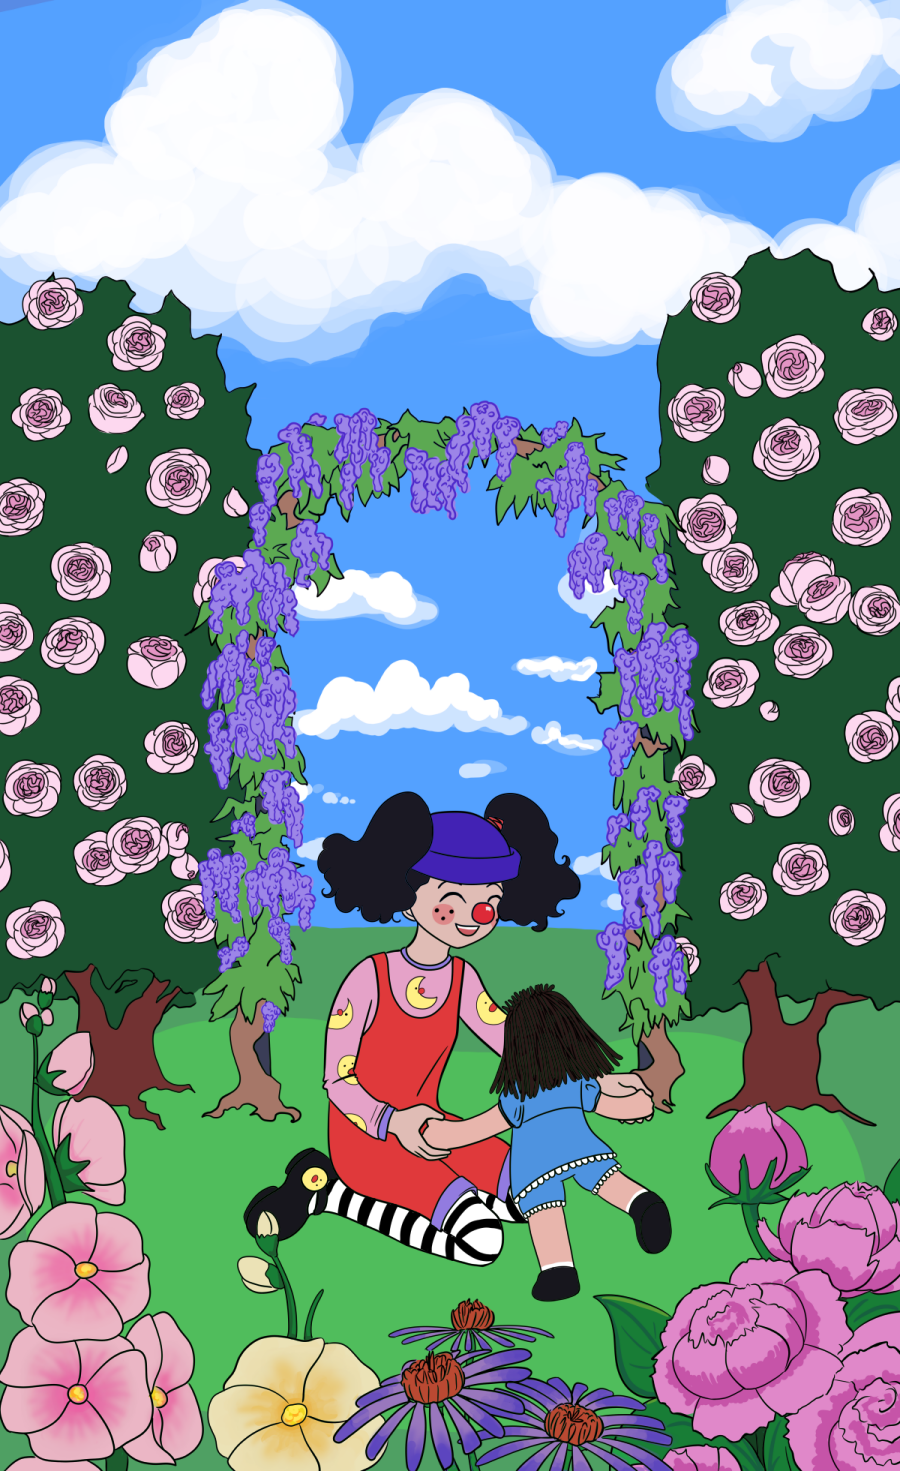 Loonette and Molly - a clown and her dolly - play together in a beautiful flower garden.